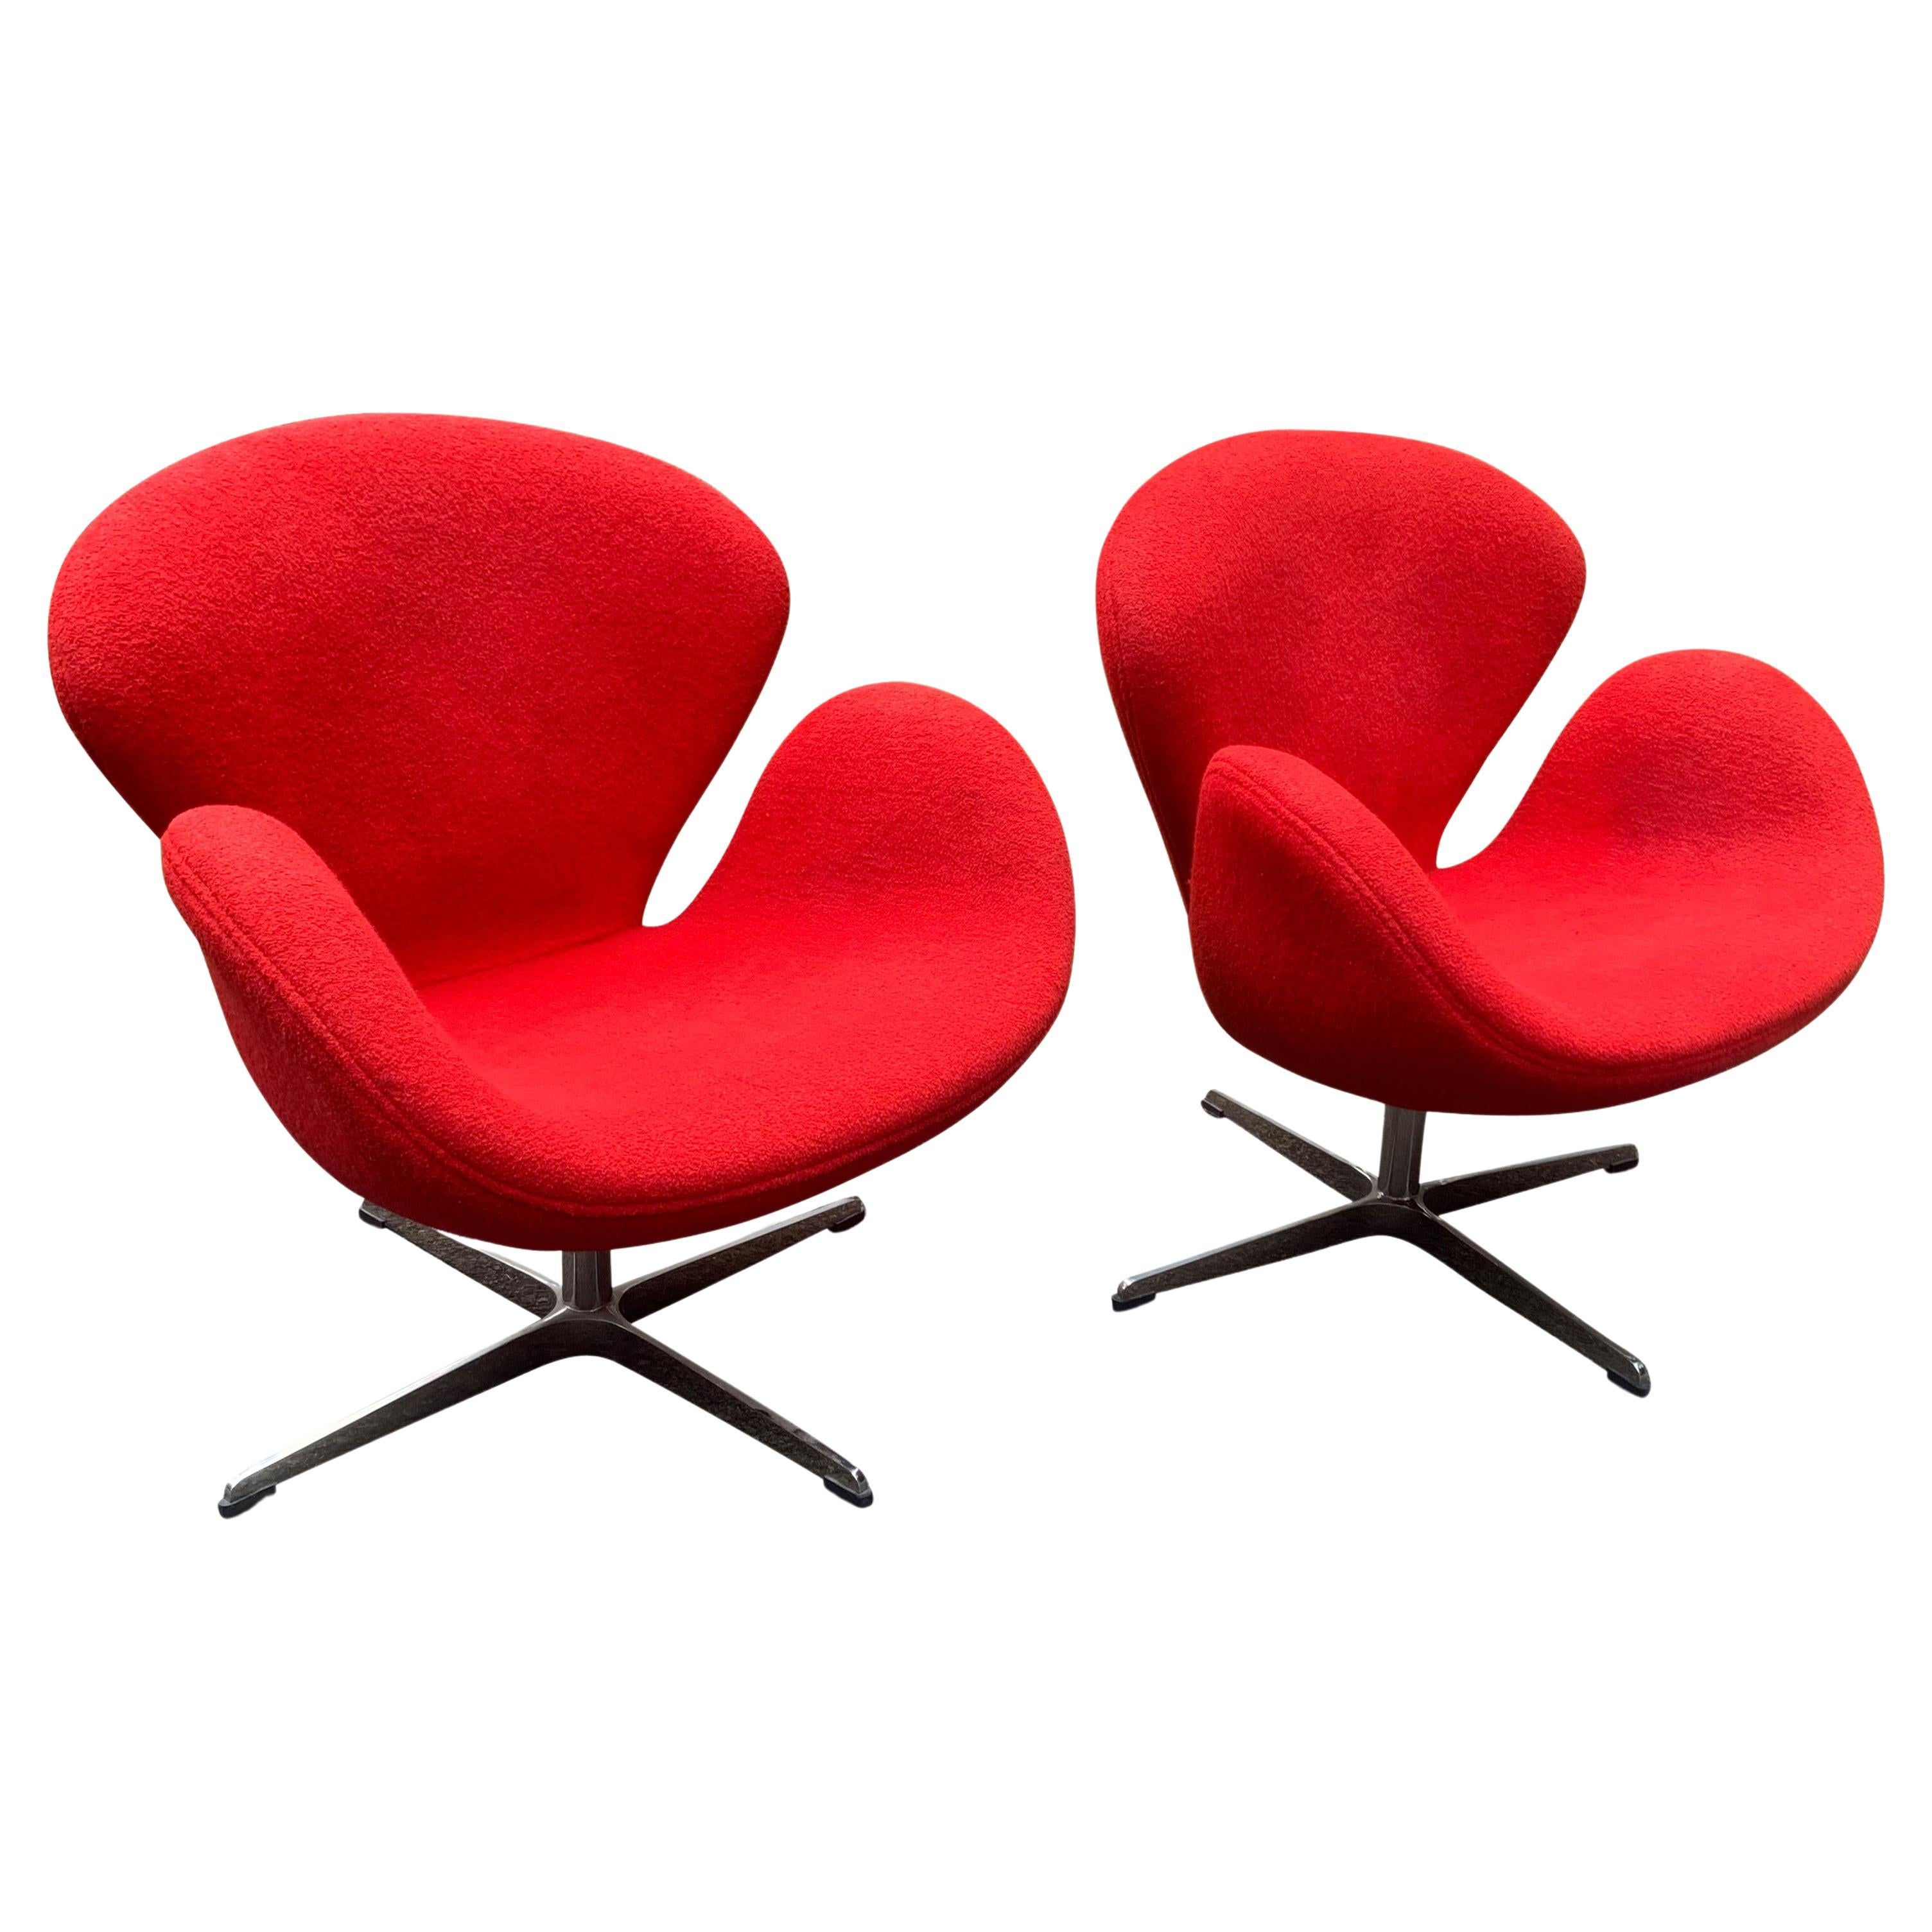 Pair of Vintage Mid Century Modern Style Swan Chairs after Arne Jacobsen For Sale